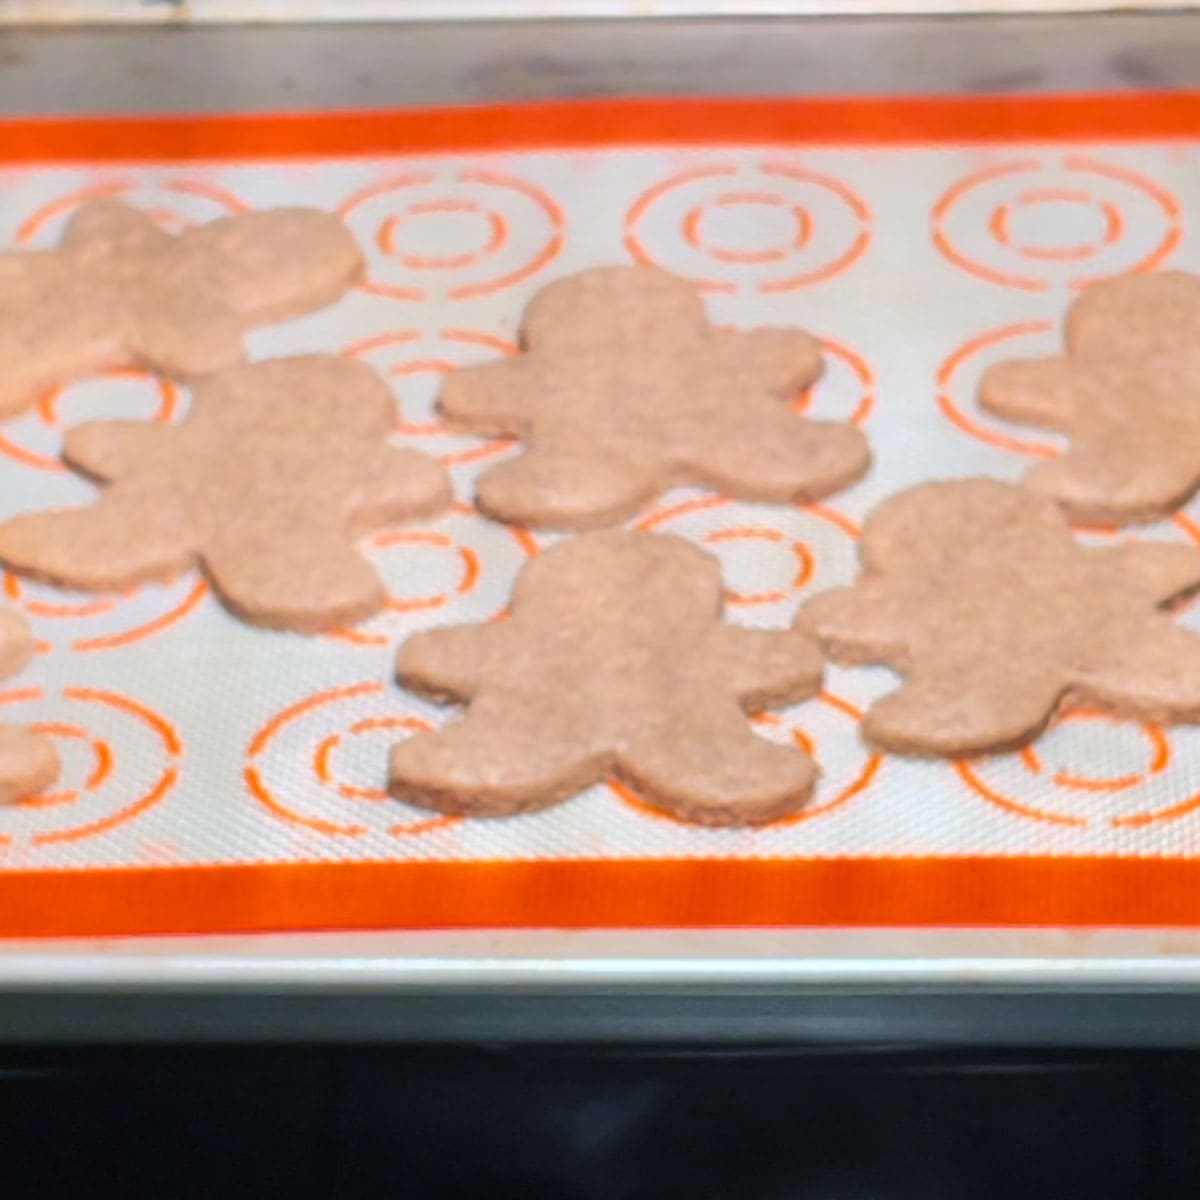 Baked gingerbread cookies in Oven.